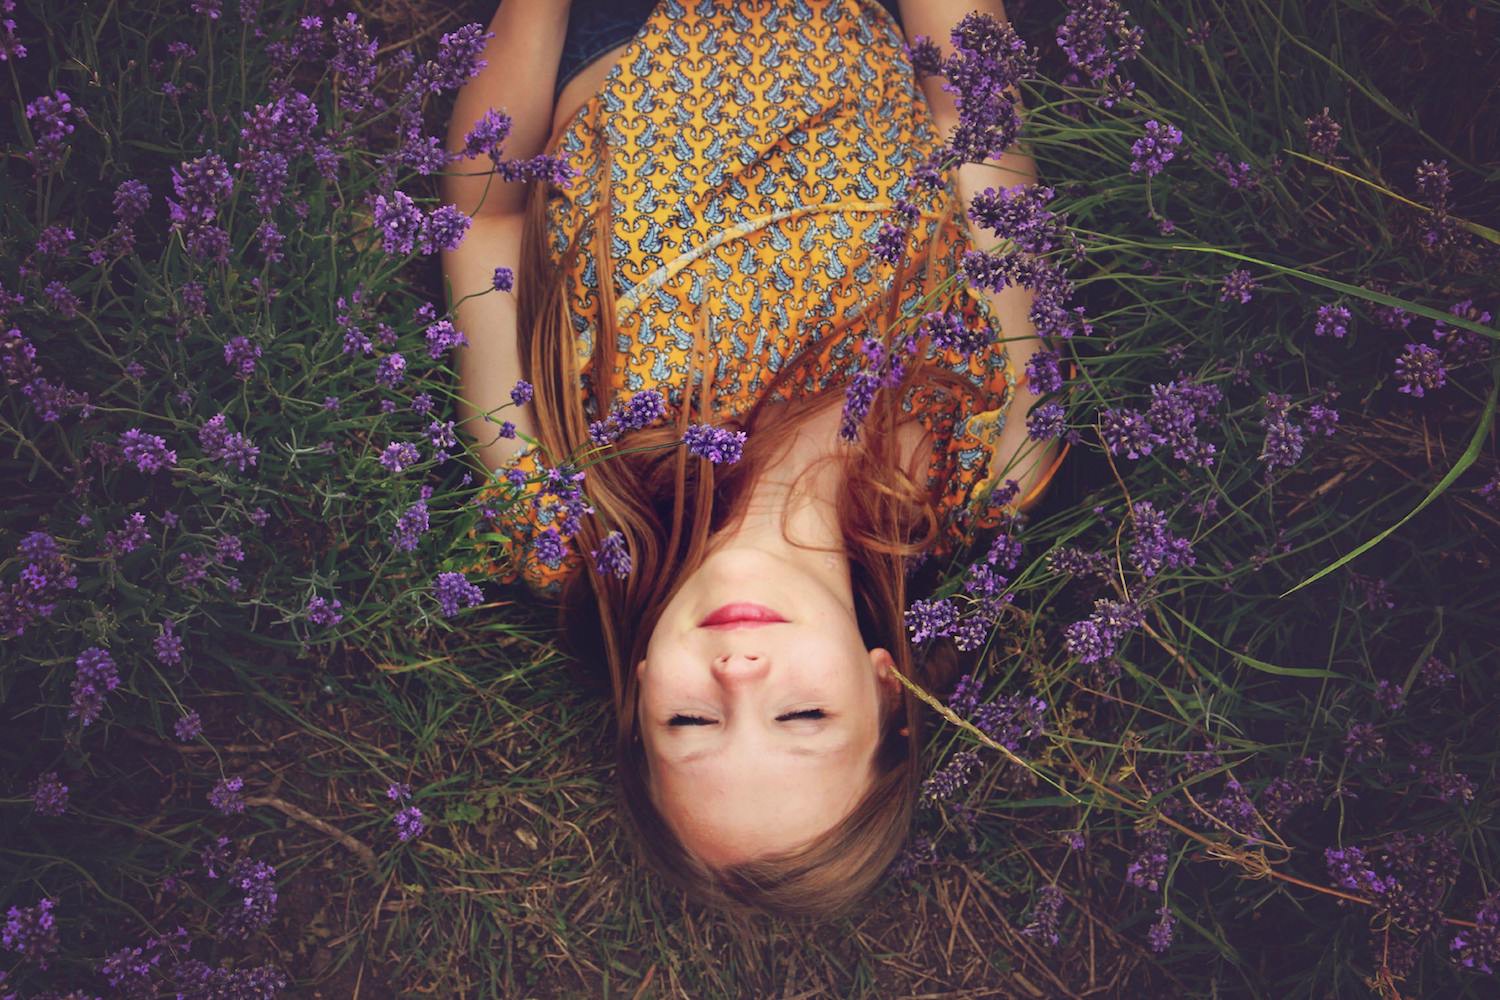 Woman lying on the ground with her eyes closed on grass among purple flowers